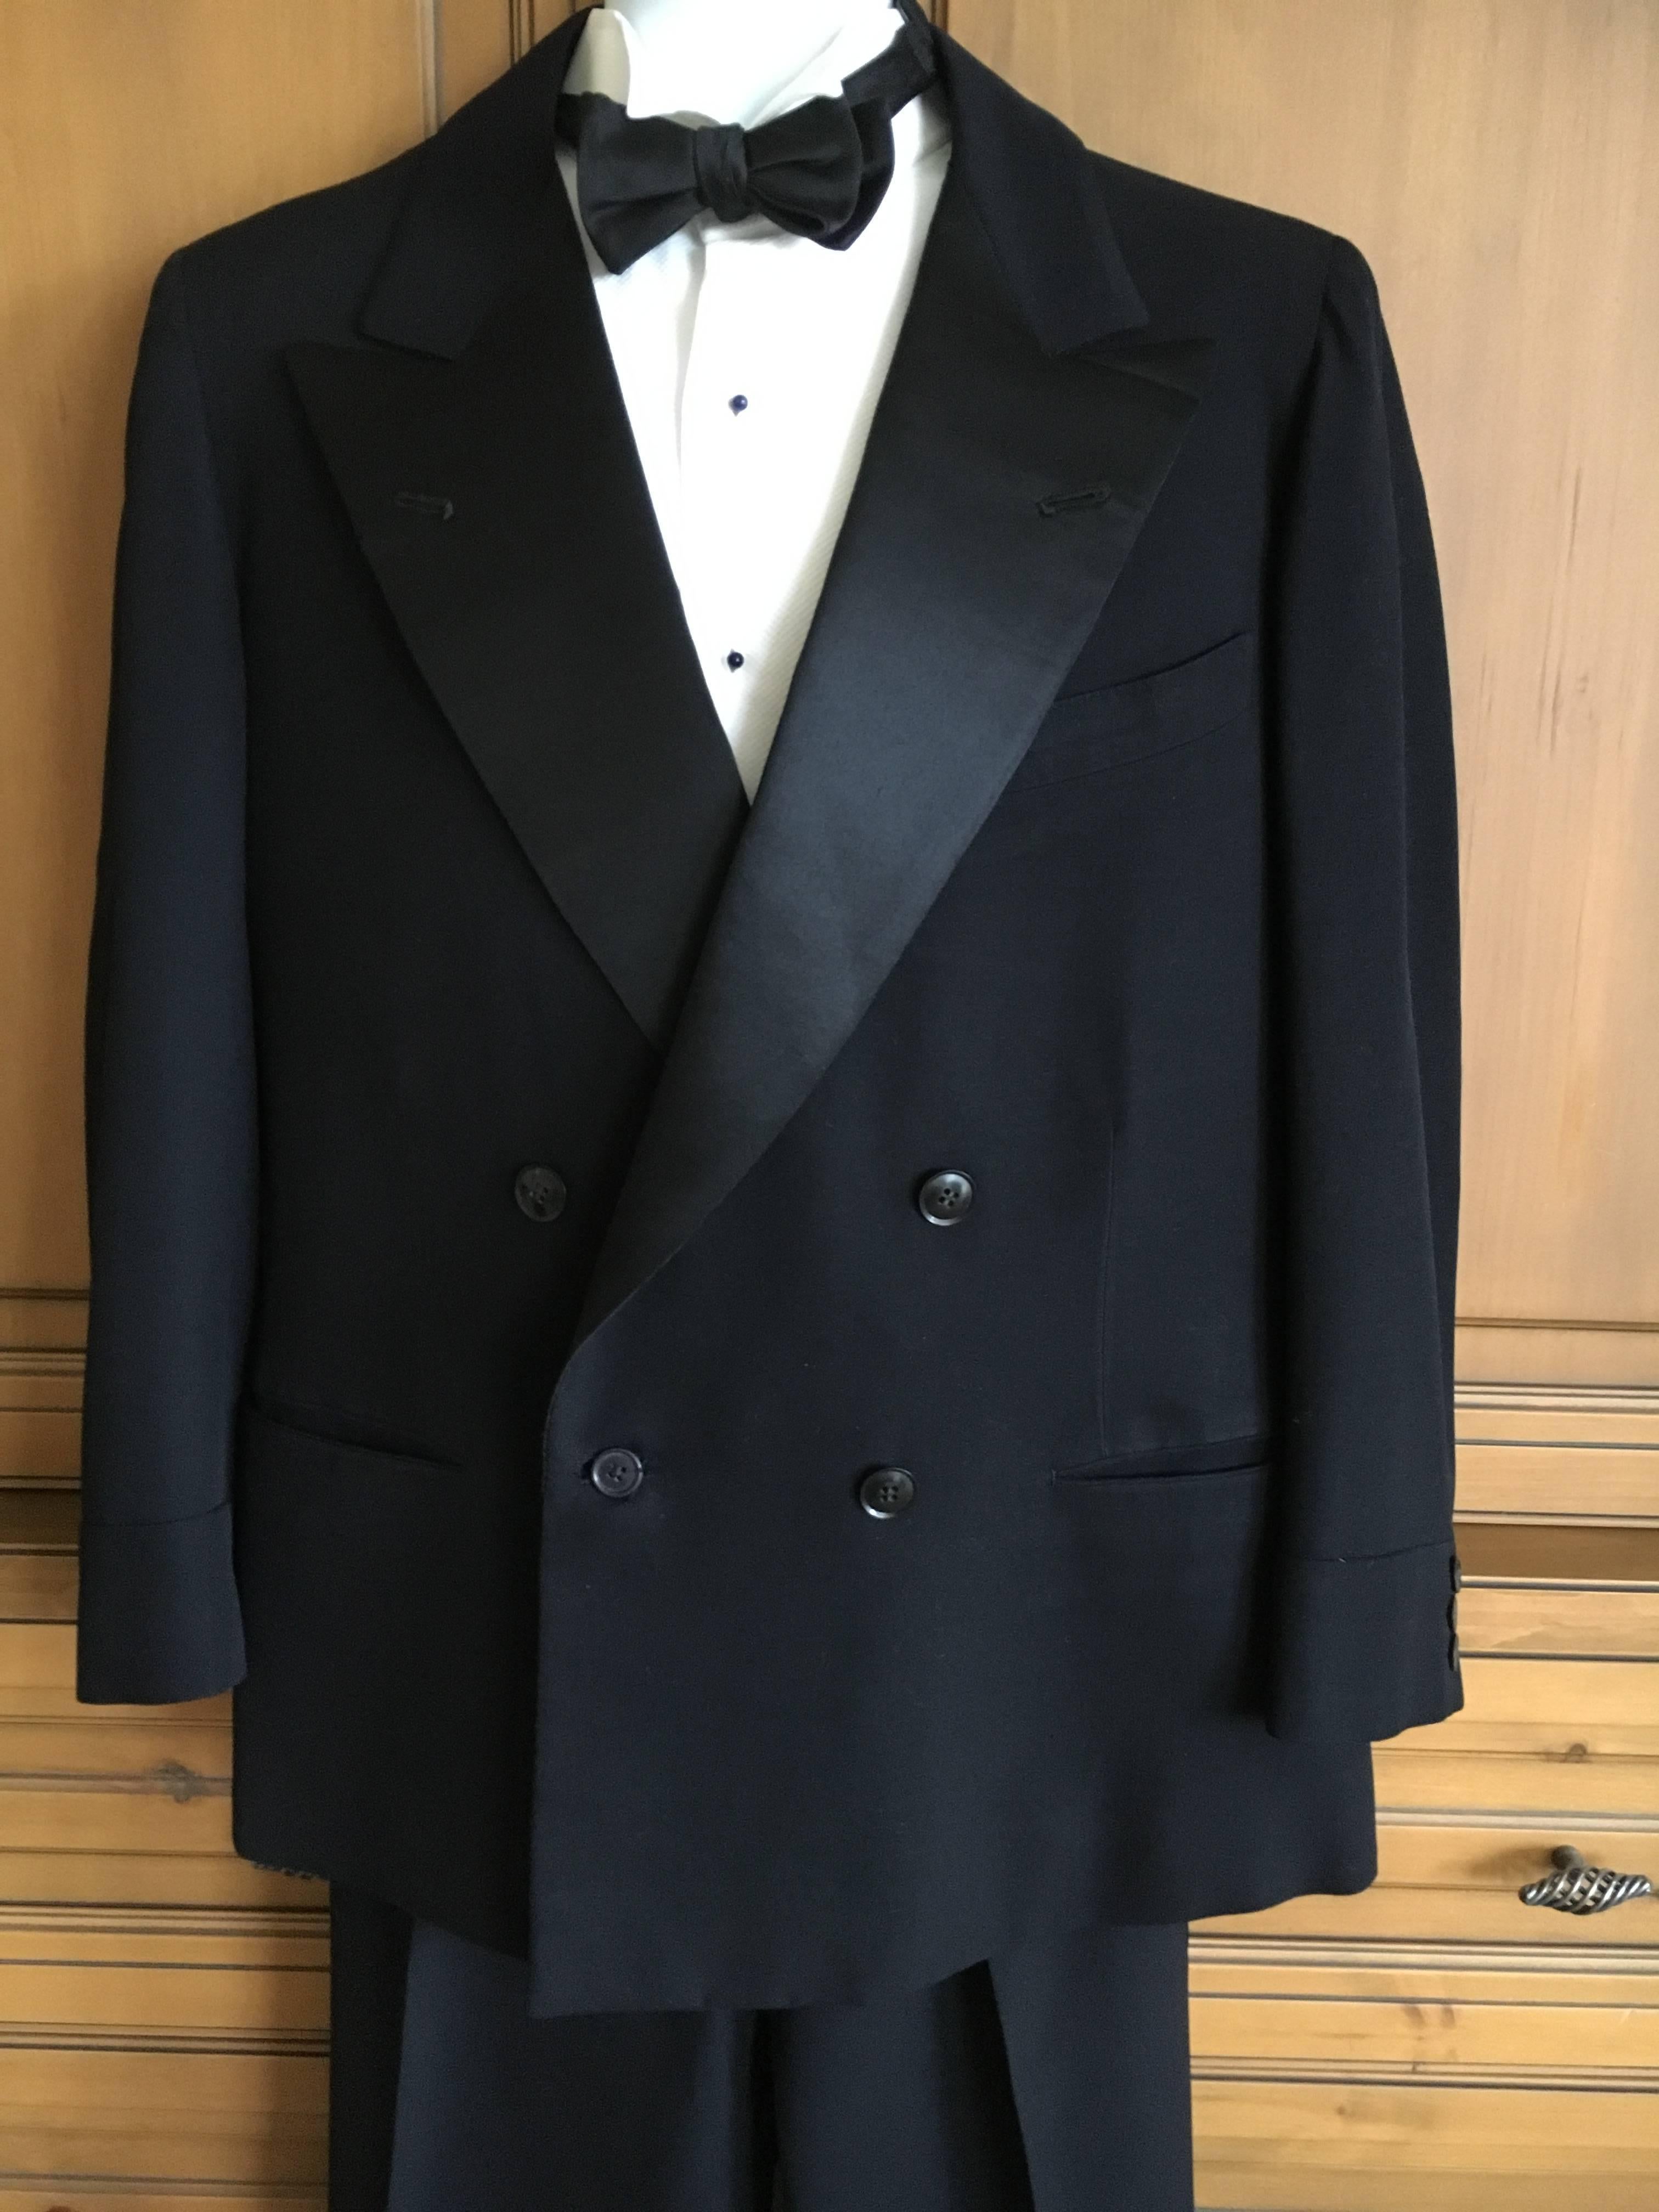 1936 Gentleman's Peak Satin Lapel Tuxedo from Society Tailor F.L. Dunne & Co. New York and Boston.

The owner was a polo playing count, whose estate we are just beginning to process.

The estate was run in the old style and these uniforms

